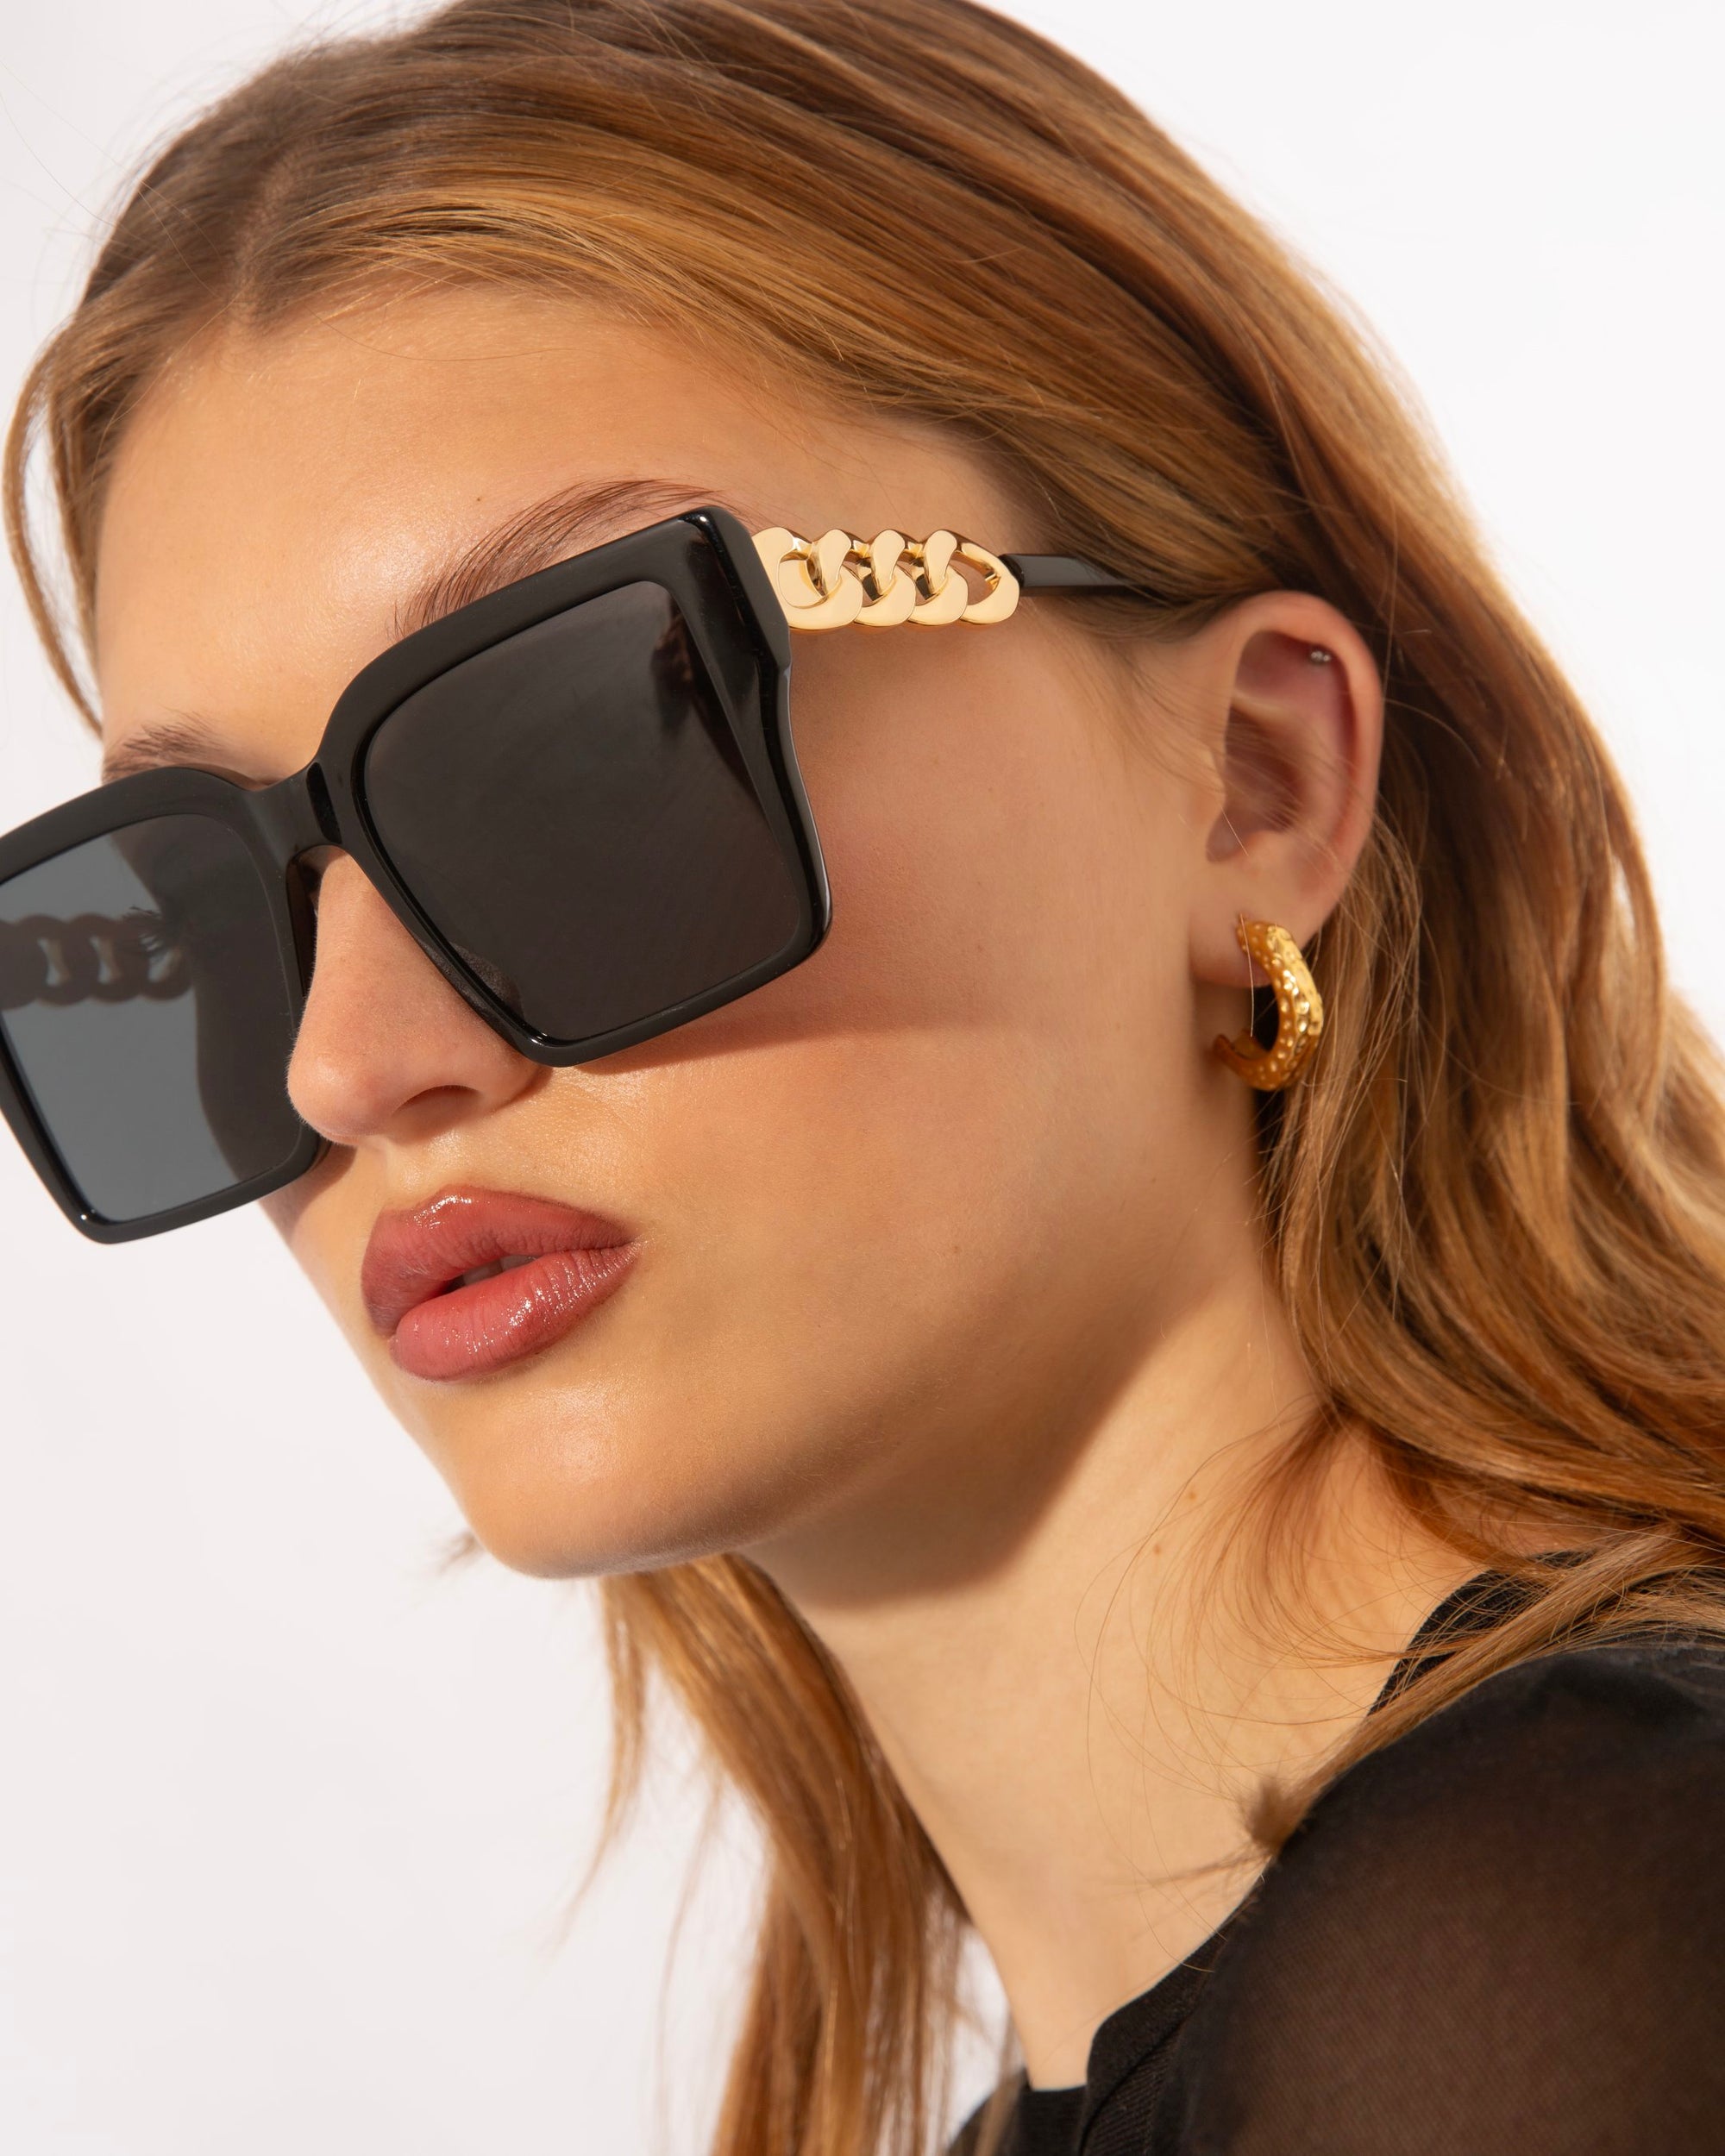 A woman with long, blonde hair wears oversized square-shaped black For Art&#39;s Sake® Castle sunglasses featuring an 18-karat gold plated chain on the frames. She is also wearing small gold hoop earrings and a black top. The background is plain white.